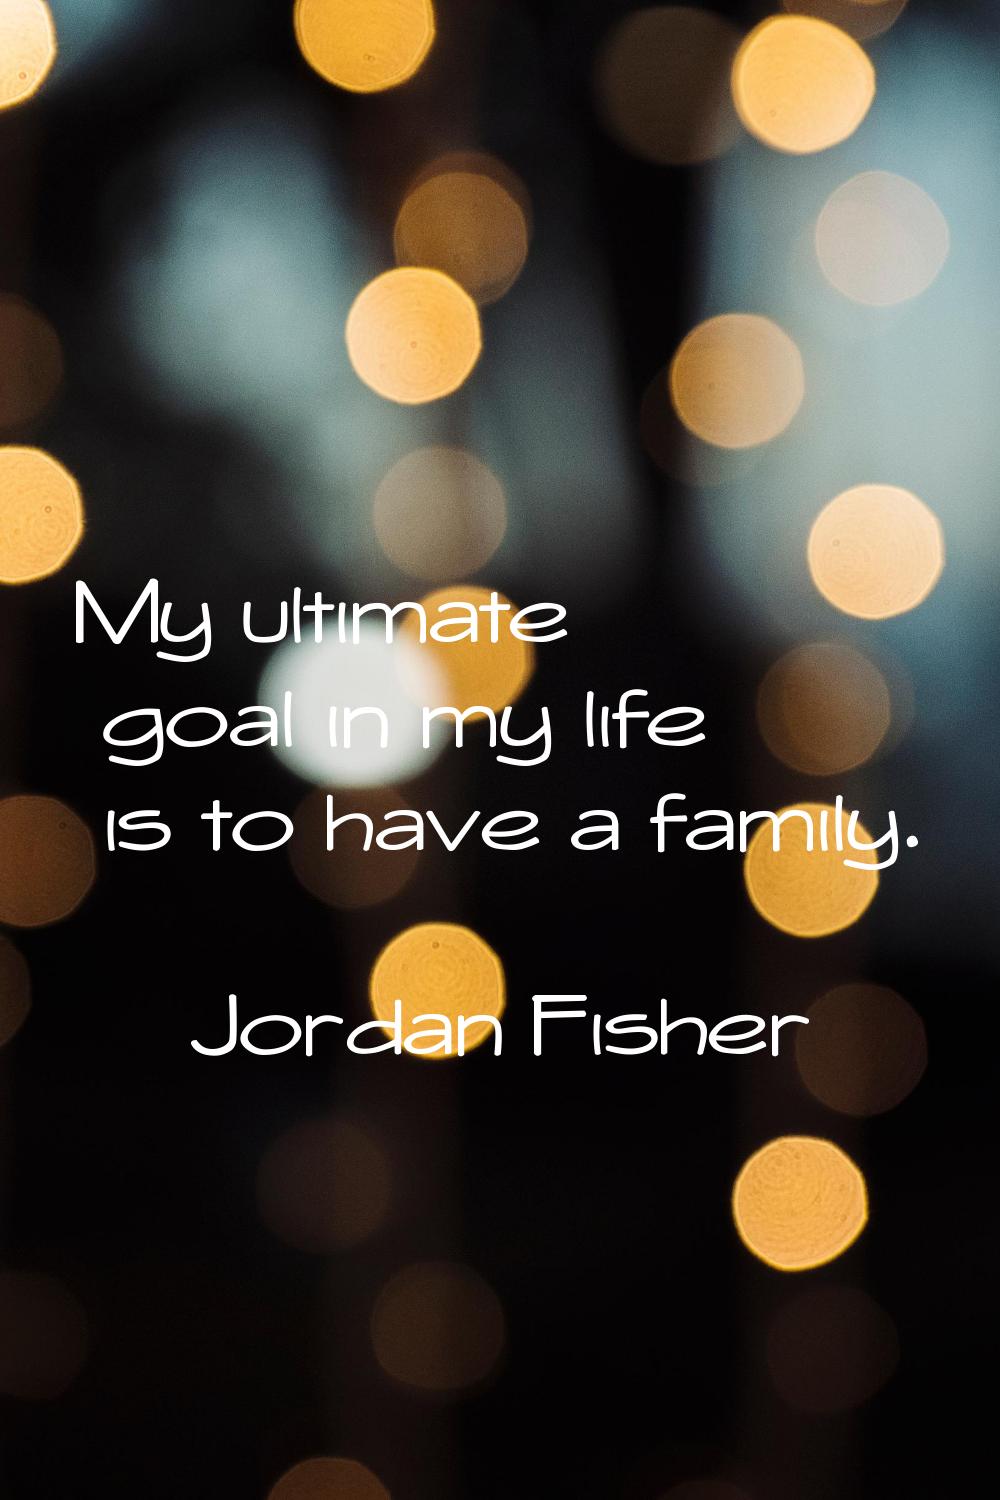 My ultimate goal in my life is to have a family.